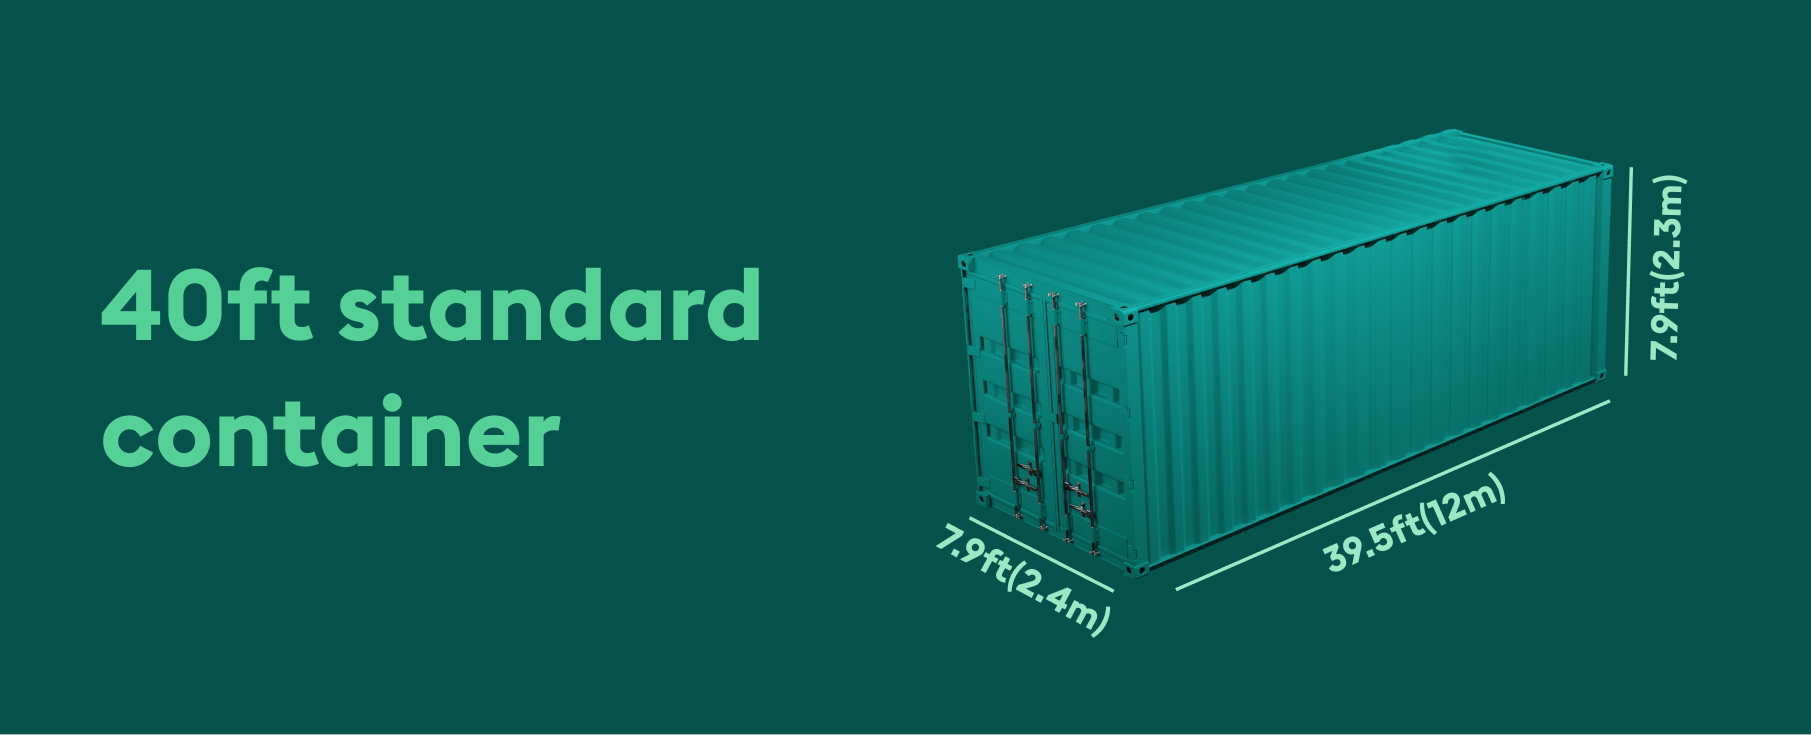 40ft standard container dimensions